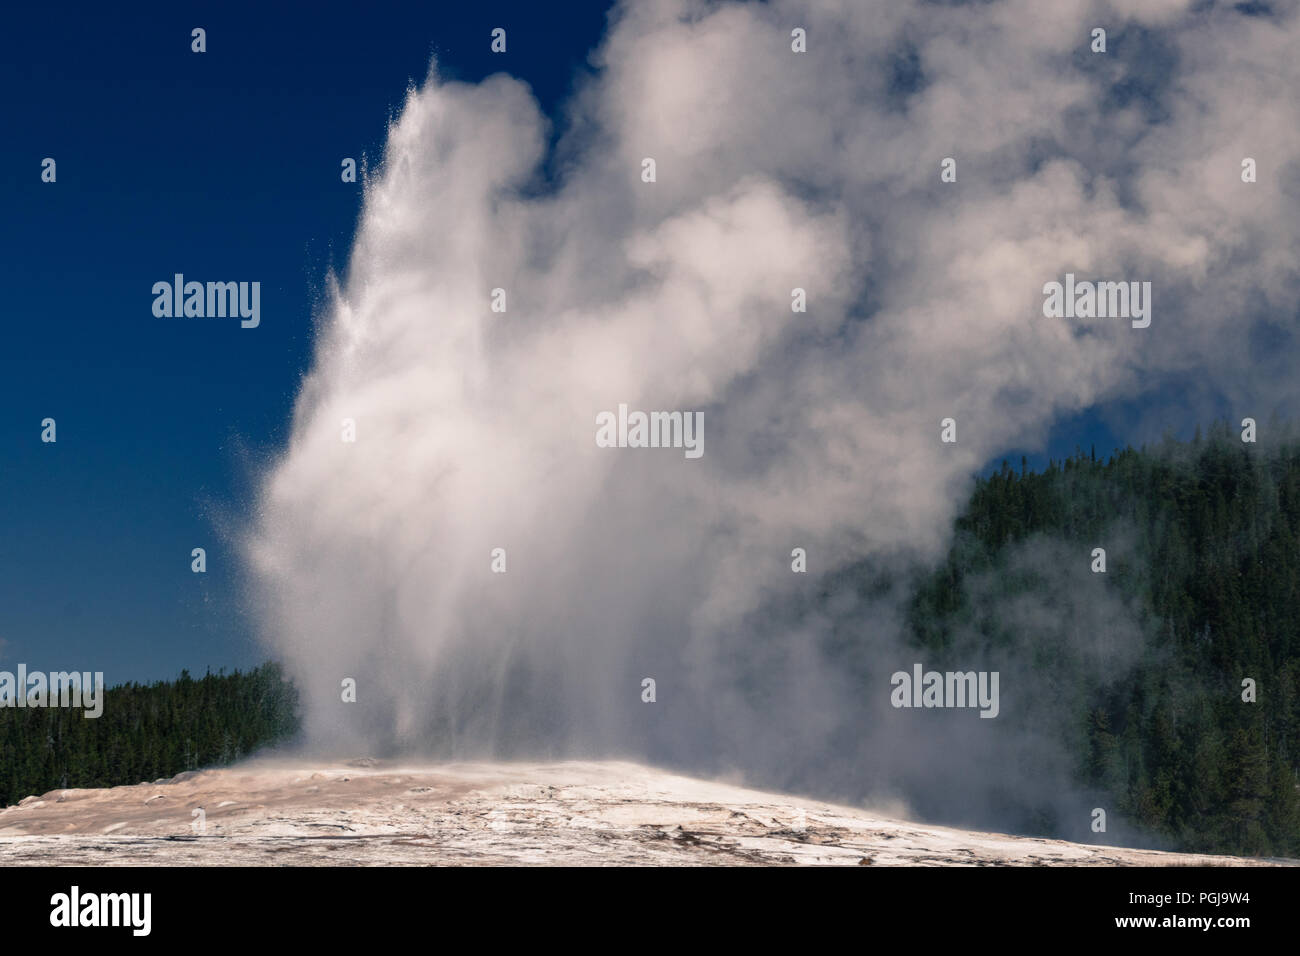 Old Faithful Geyser Yellowstone National Park Banque D'Images